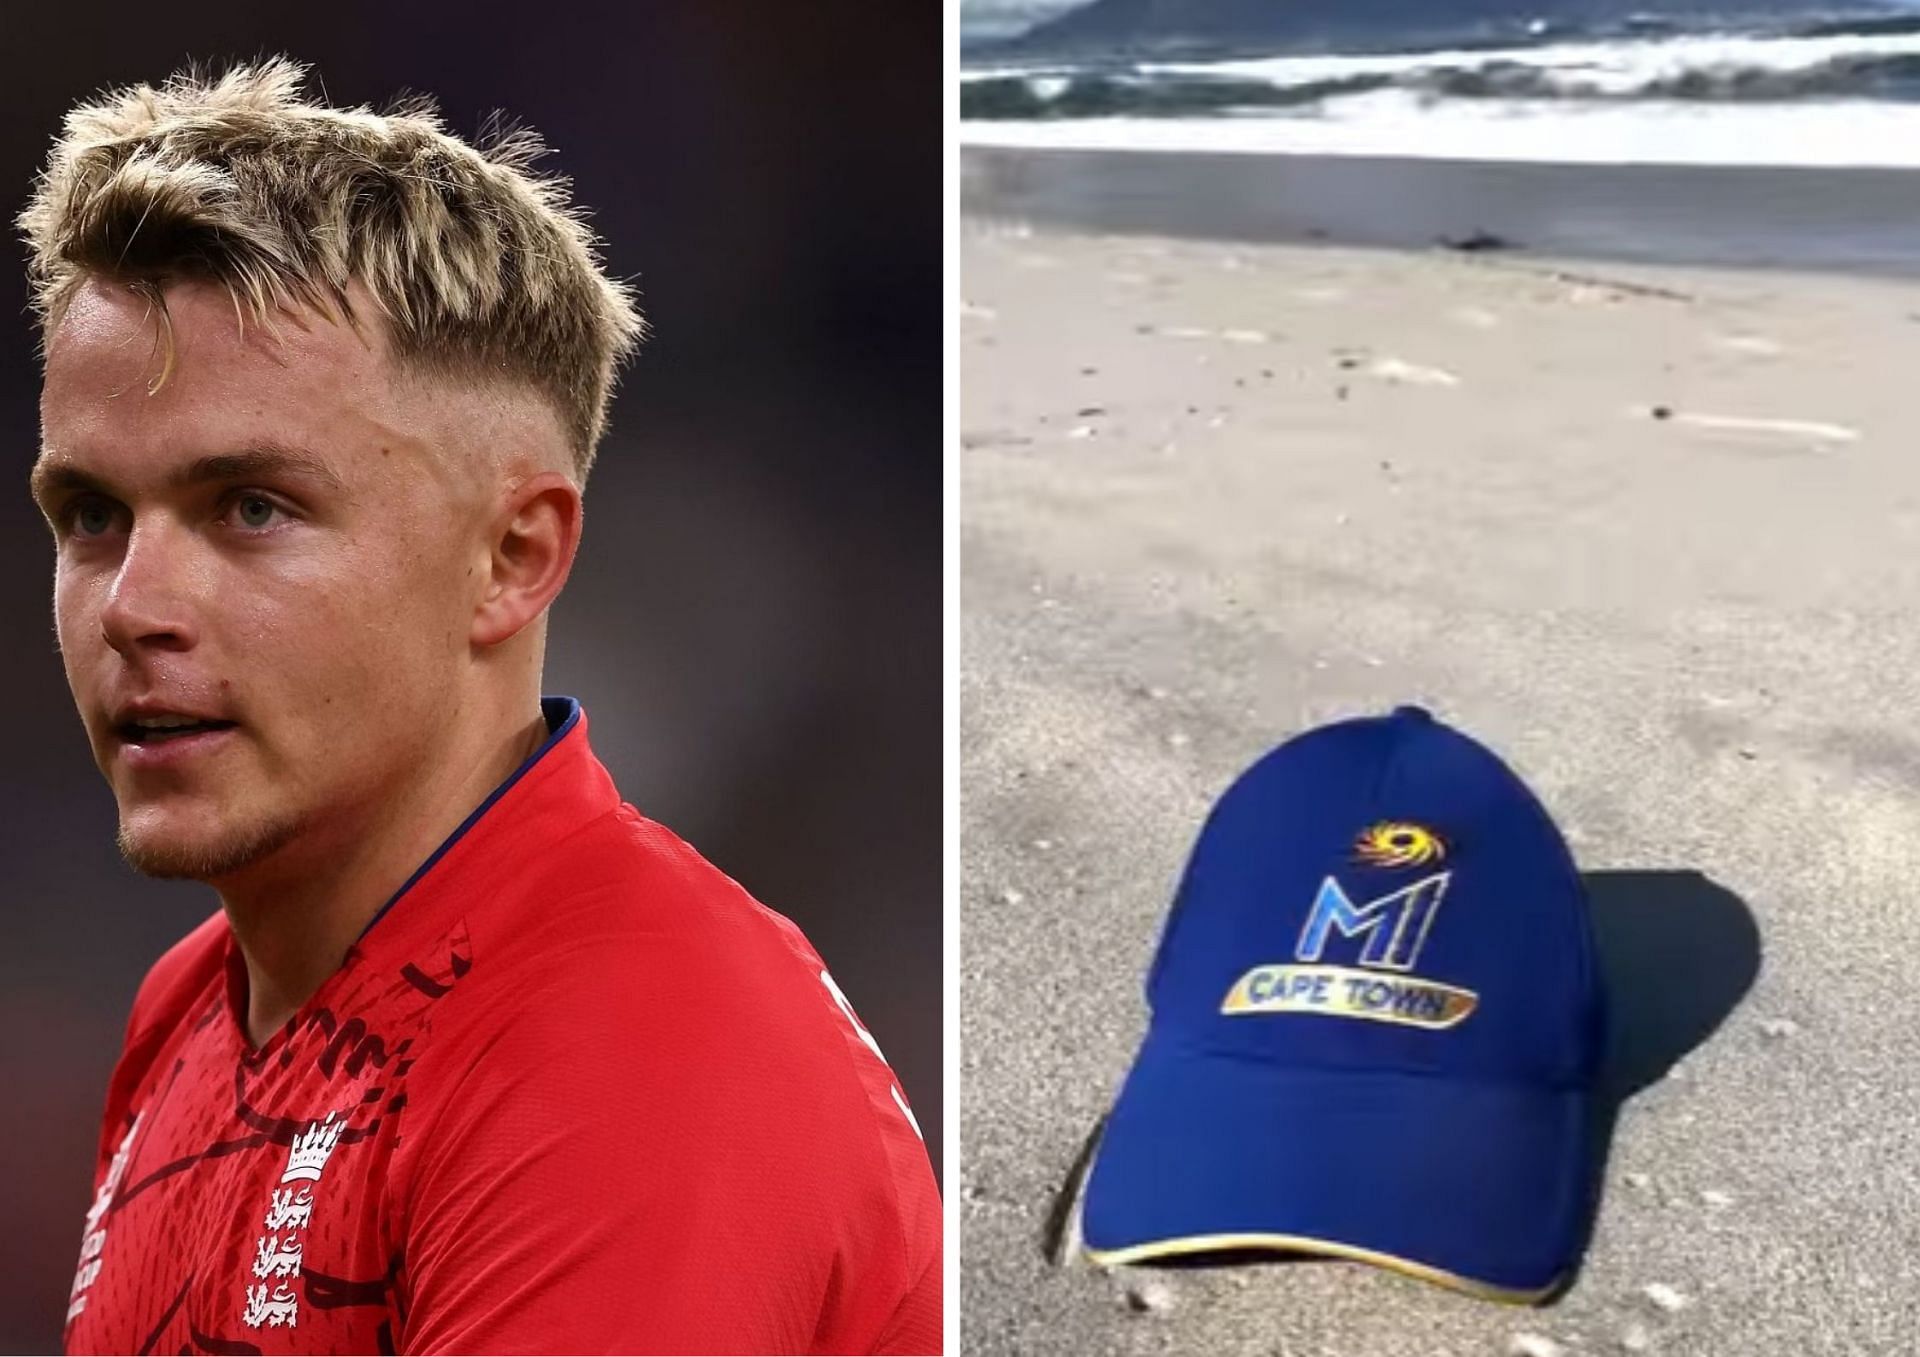 Sam Curran will turn out for MI Cape Town in the SA20 (Picture Credits: Getty Images; Instagram/ MI Cape Town)